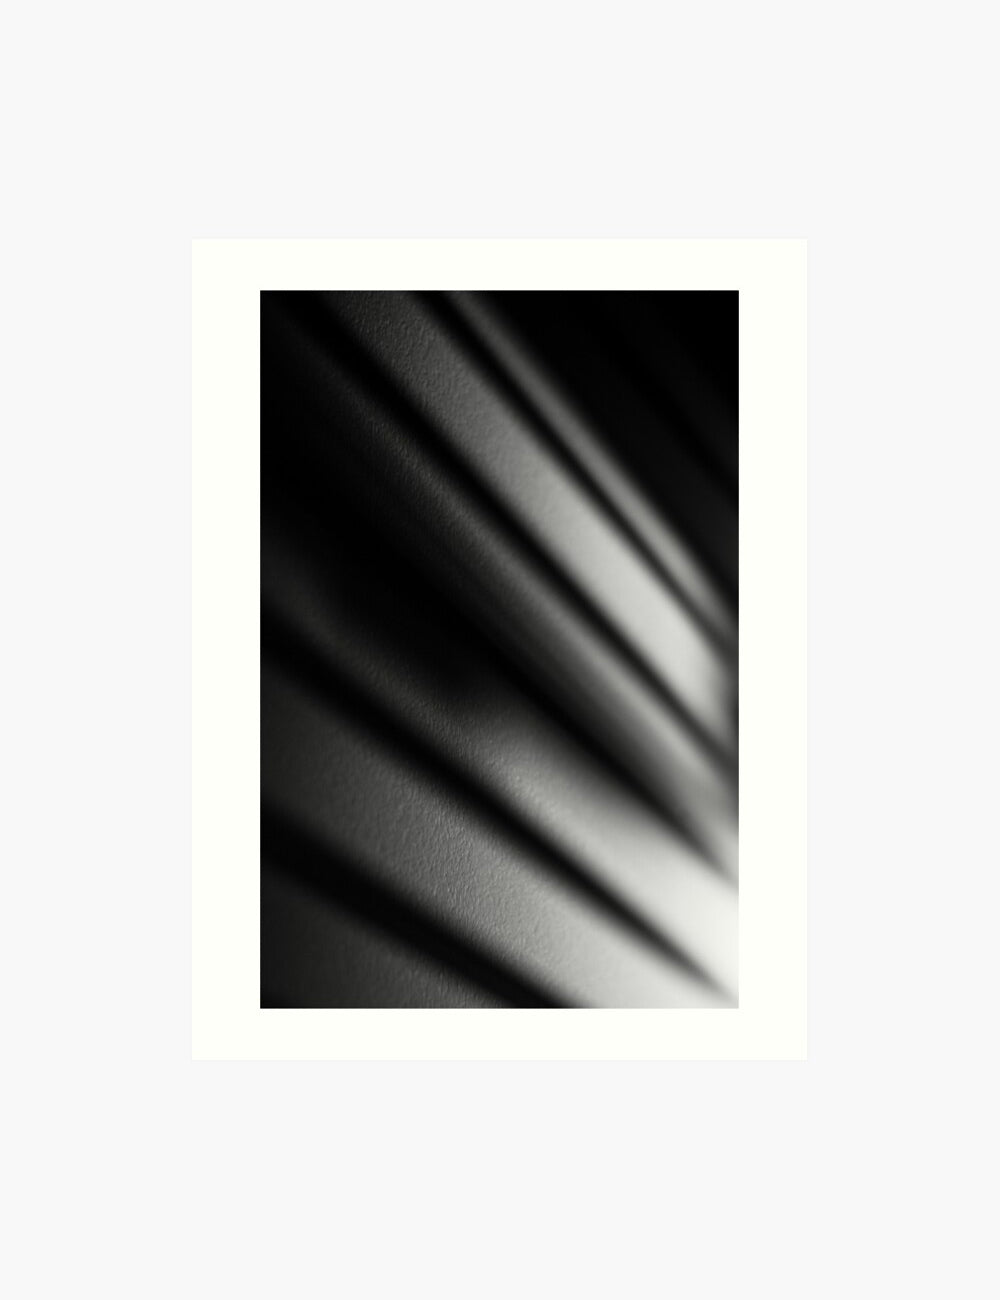 LIGHT AND SHADOW. Black and white photography. Abstract, minimalist printable wall art. LIGHT AND SHADOW art print. - PAPER MOON Art & Design